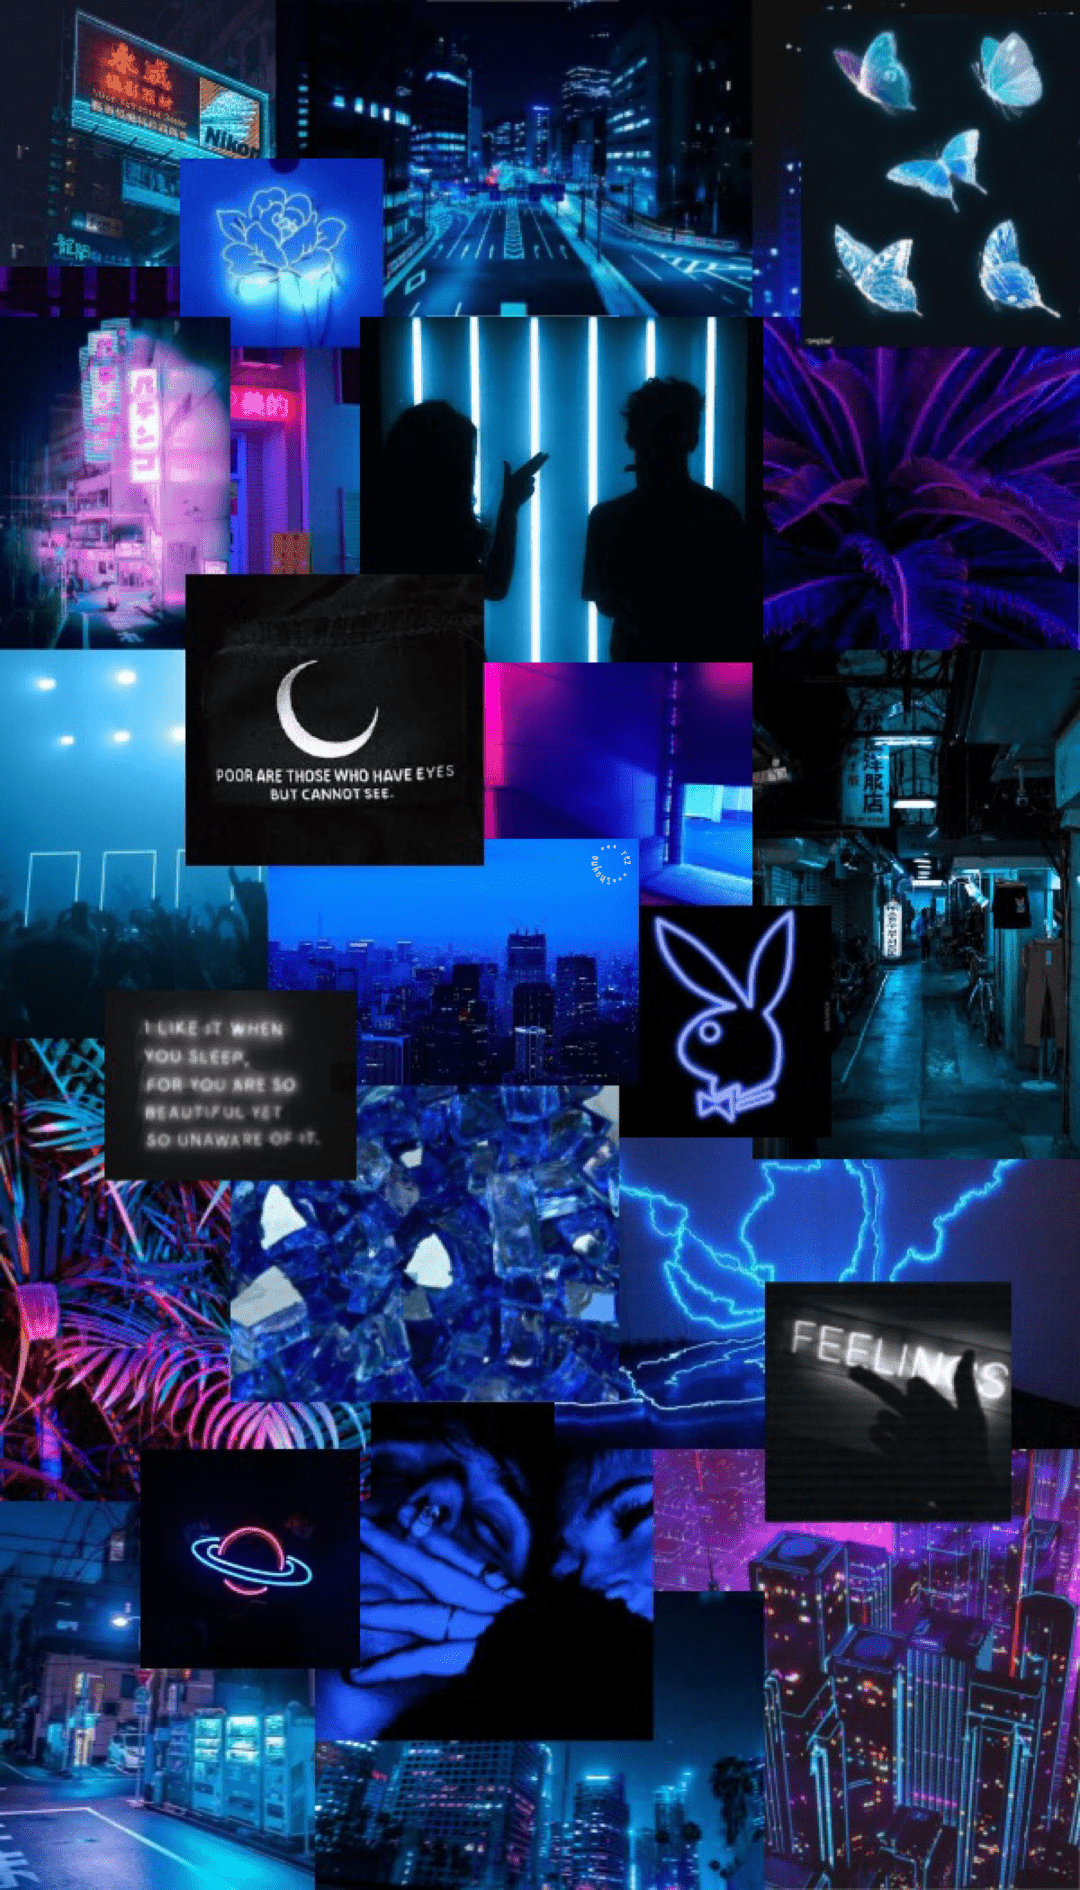 Aesthetic wallpaper neon blue and purple city night cityscape with anime girls - Neon blue, neon